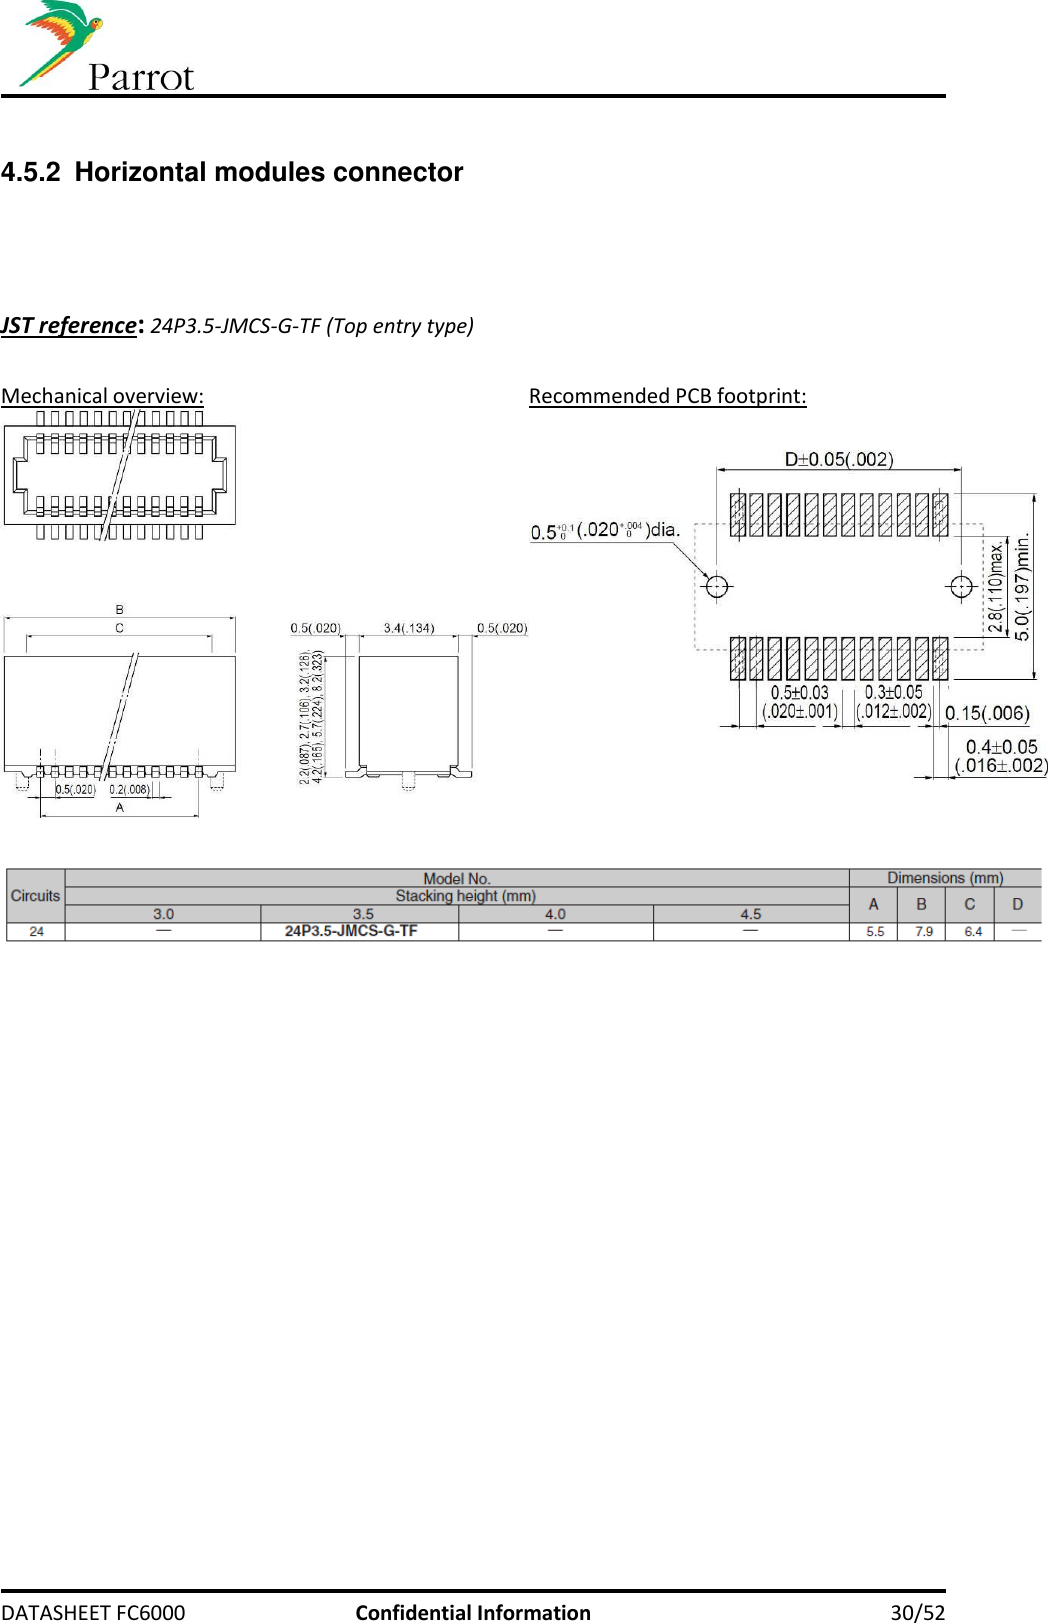     DATASHEET FC6000  Confidential Information 30/52  4.5.2 Horizontal modules connector     JST reference: 24P3.5-JMCS-G-TF (Top entry type)  Mechanical overview: Recommended PCB footprint:       